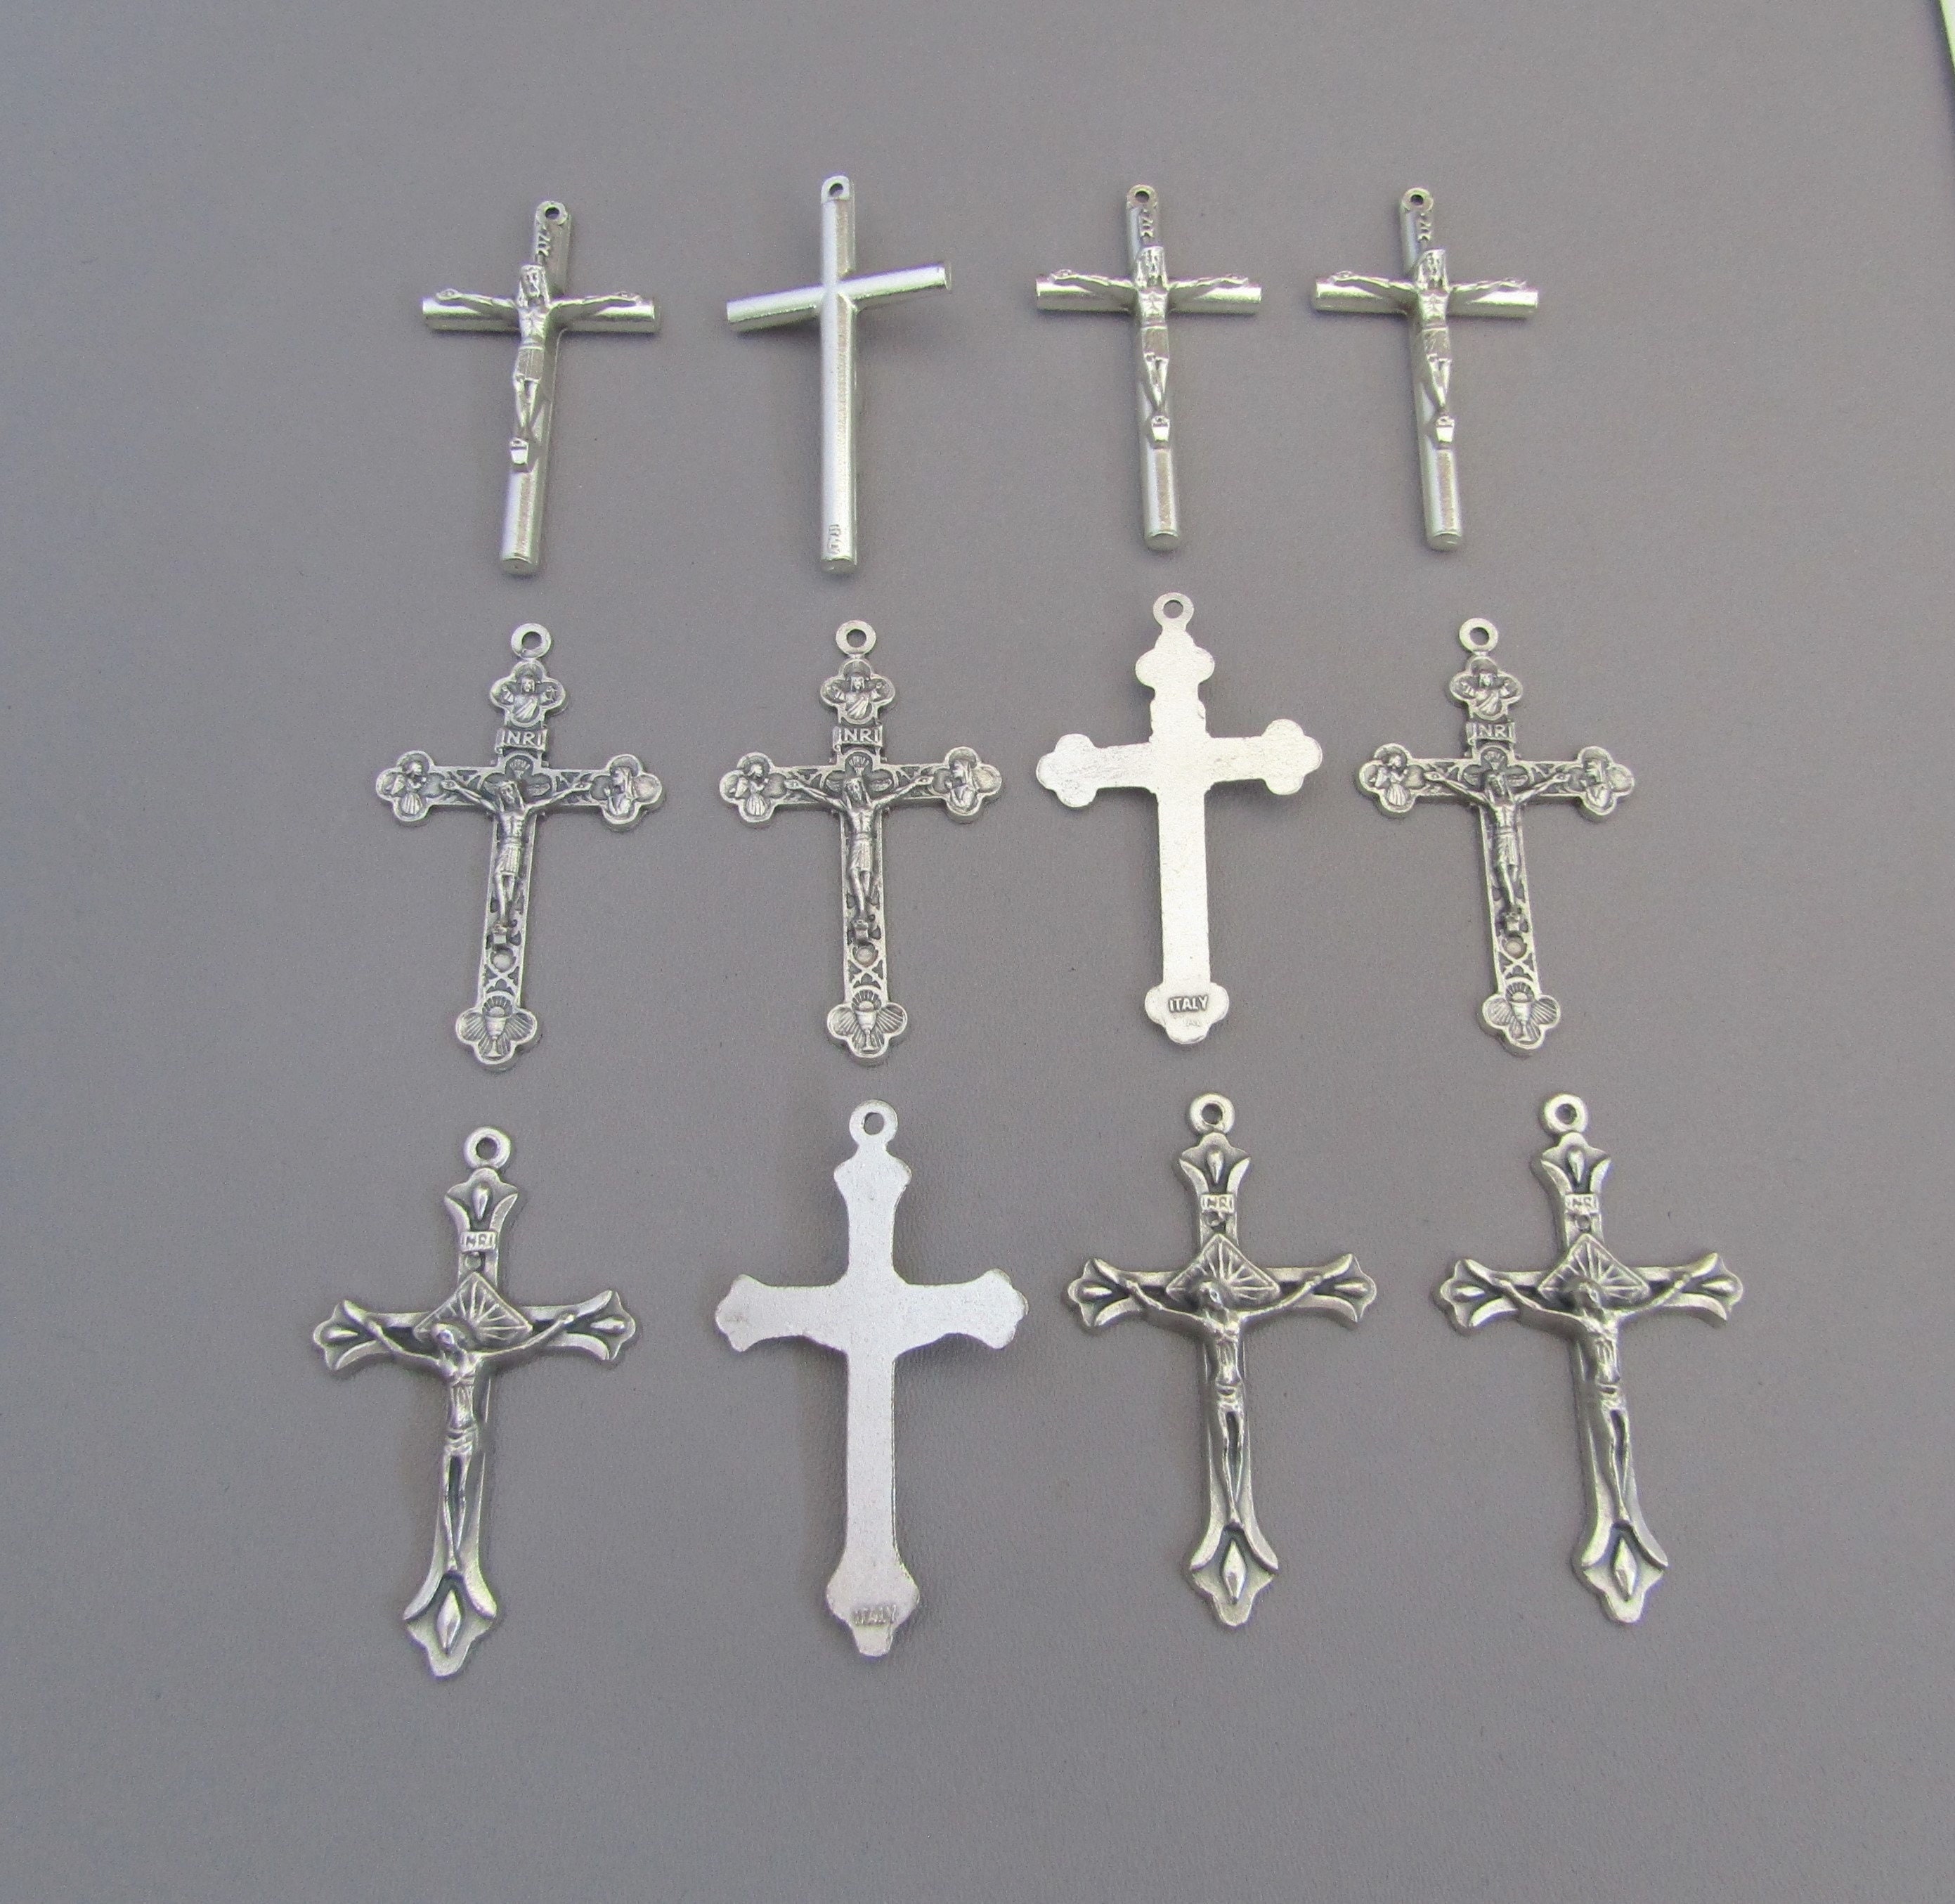 Sale Assortment Catholic Rosary Centerpiece and  Crucifix-crucifixes-religious Medal Connectors-silver Rosary Findings-diy Rosary  Making Kit 